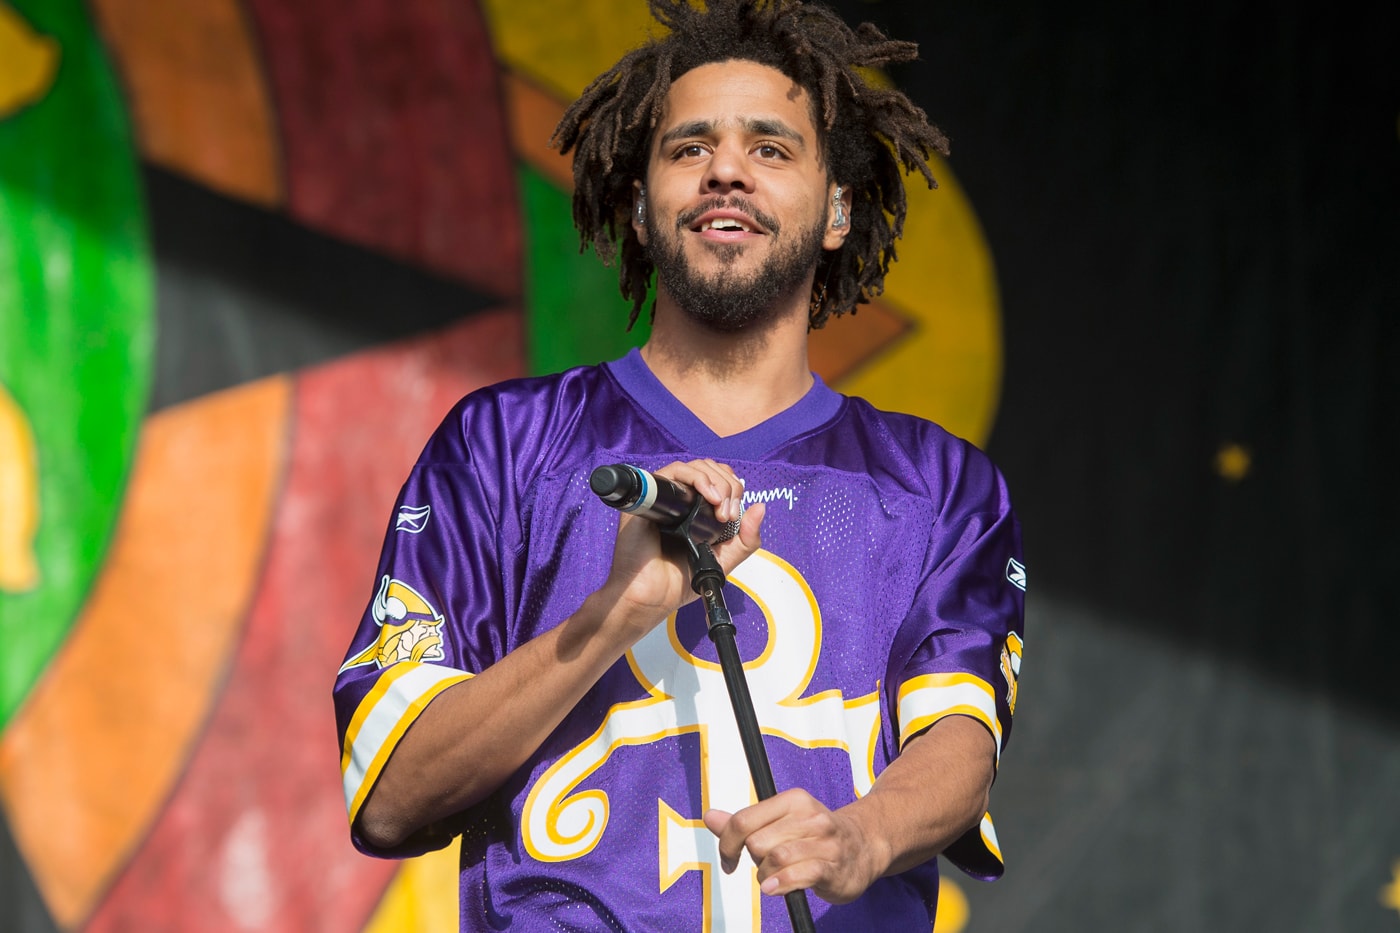 J. Cole Will Bring Barack Obama to Upcoming Performance